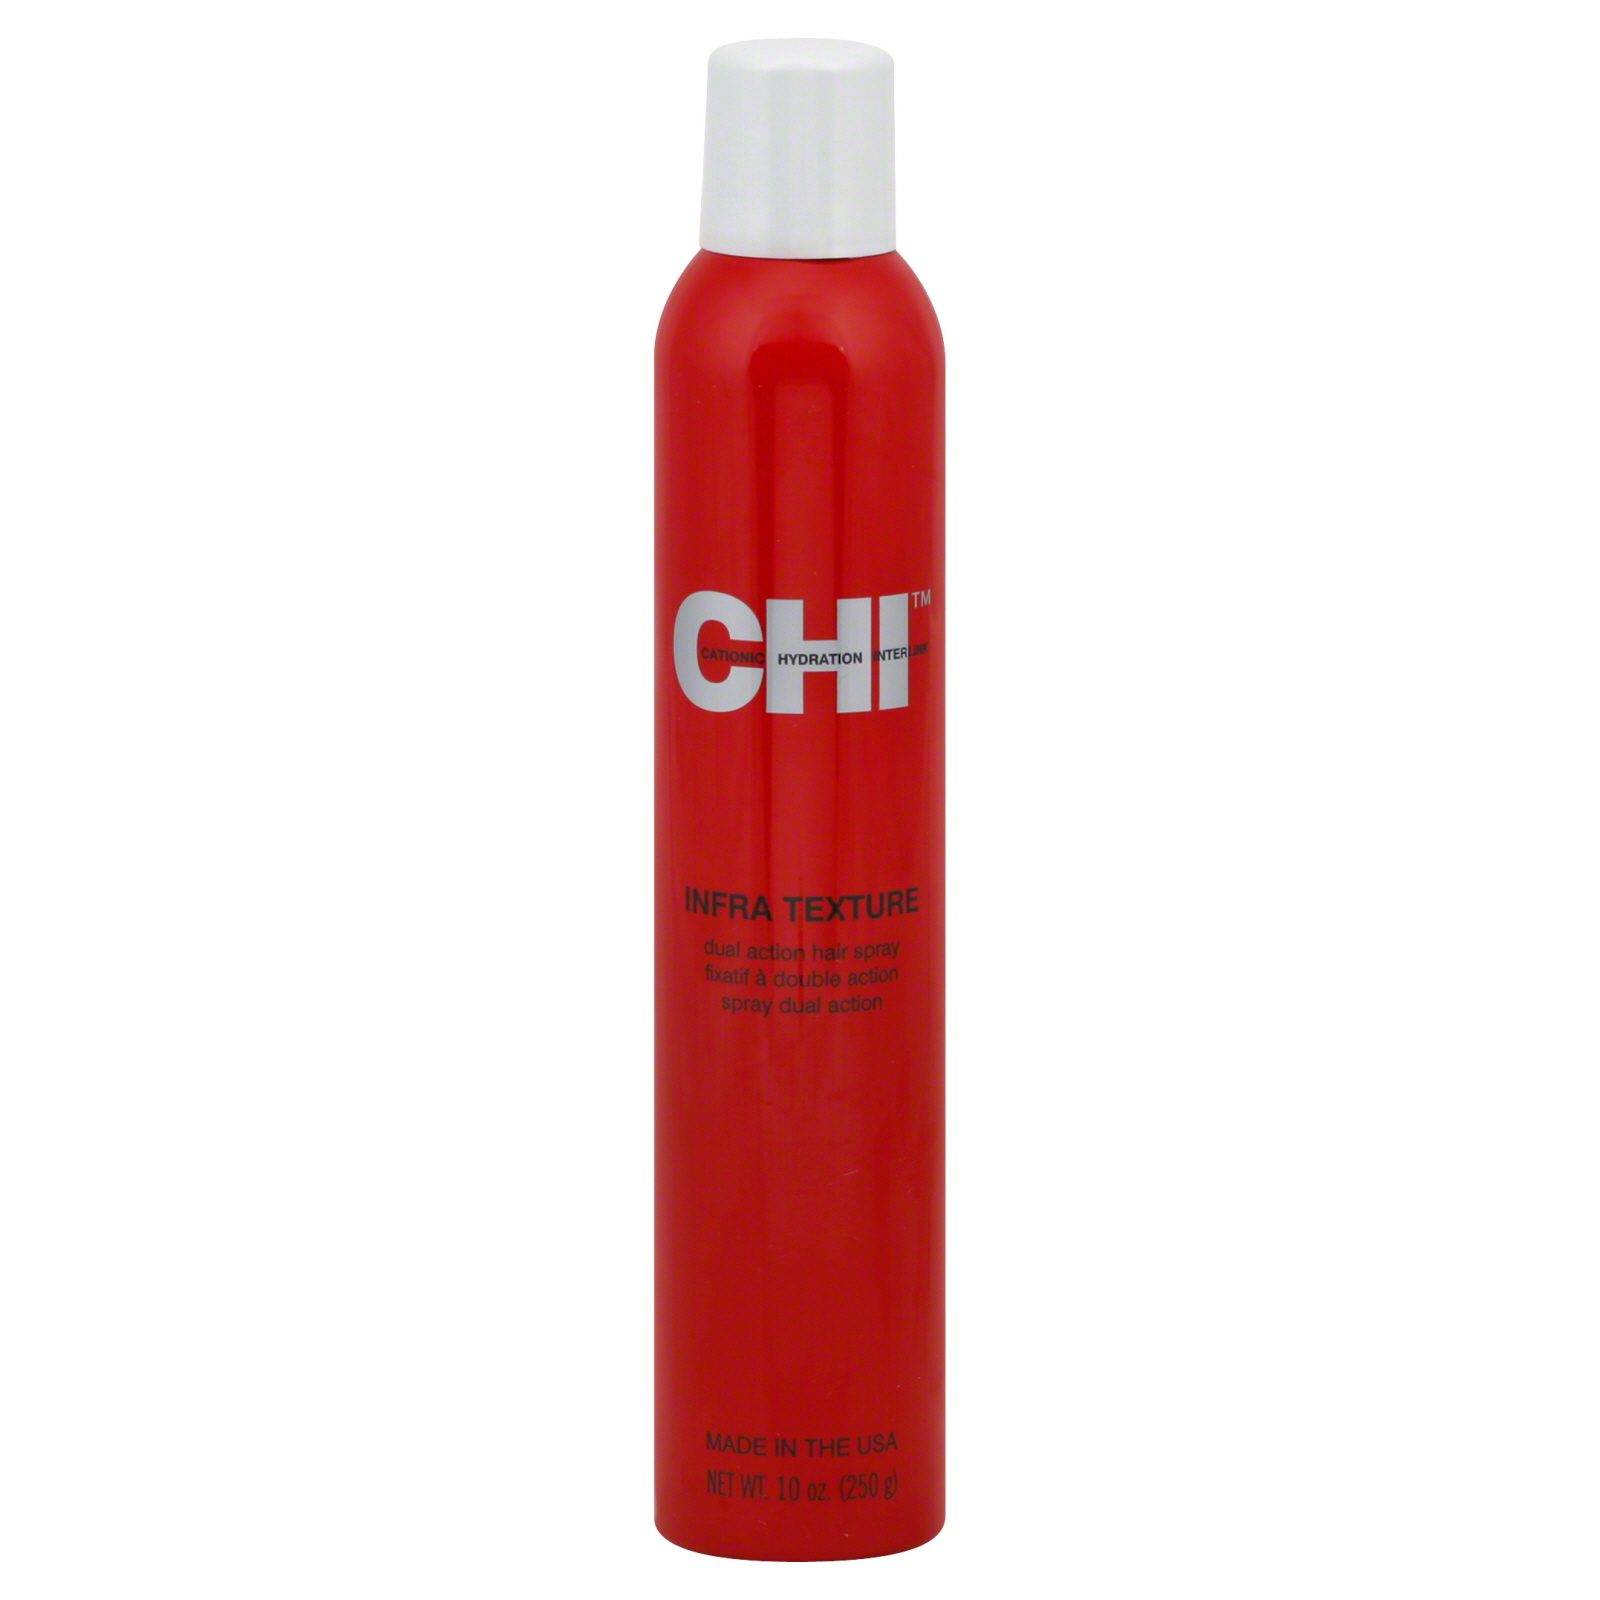 Chi Infra Texture Hair Spray by  for Unisex - 10 oz Hairspray